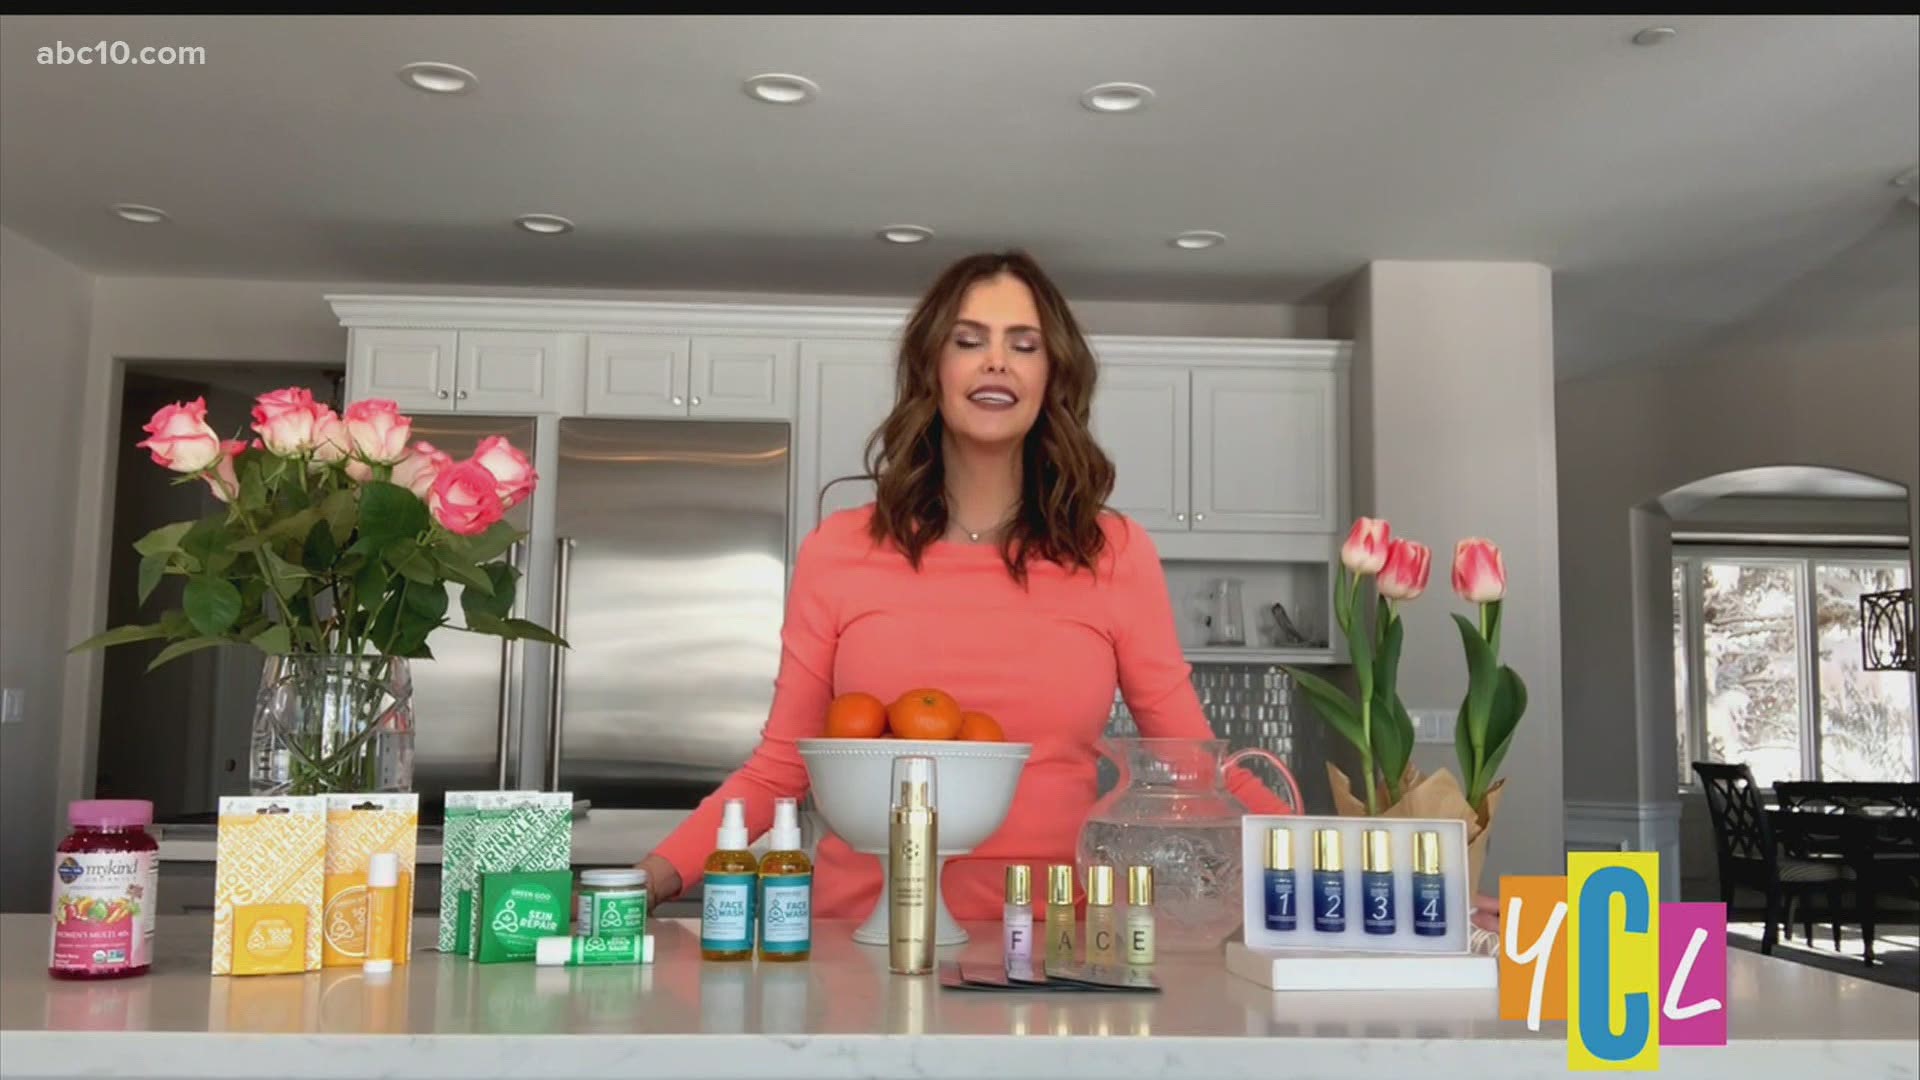 Lifestyle expert Katy Love shares ways to transition skincare regimens from winter to spring, including exfoliating, moisturizers and staying hydrated.